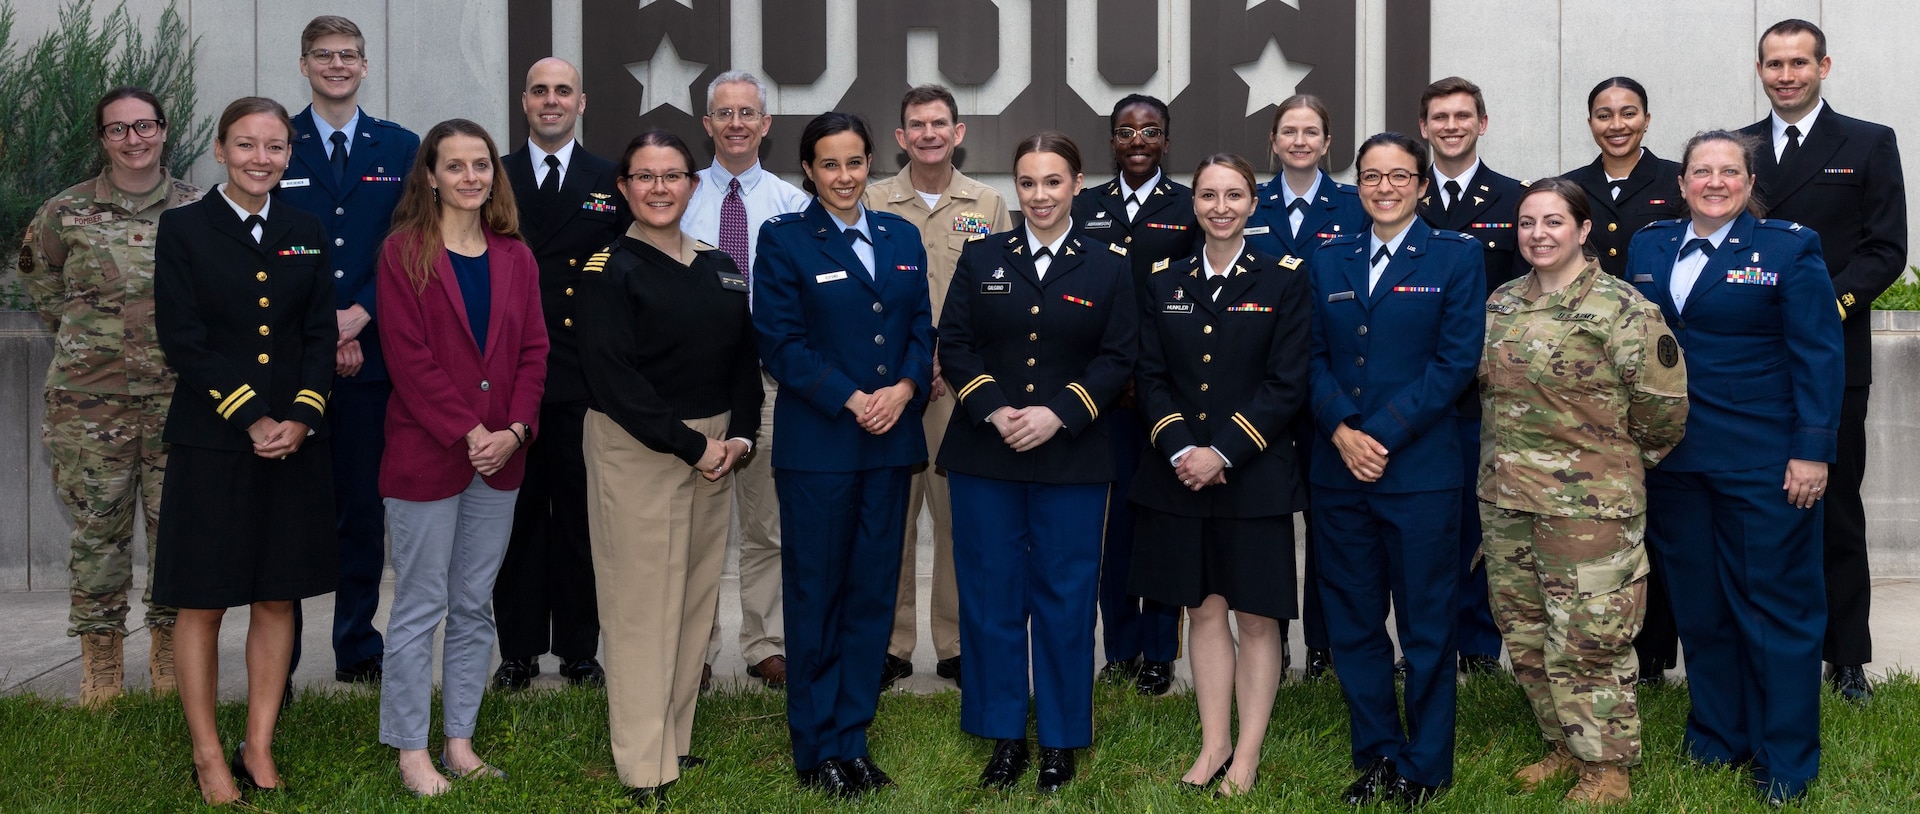 Staff and residents of the National Capital Consortium Uniformed Services Residency in Gynecologic Surgery and Obstetrics program, along with Dr. Christopher Ennen (back row, third from left), fellowship program director for Maternal Fetal Medicine Fellowship at the University of Virginia pause for a picture during the 28th Annual Robert C. Park Resident Research Day in Obstetrics and Gynecology, held on May 5 at Walter Reed.